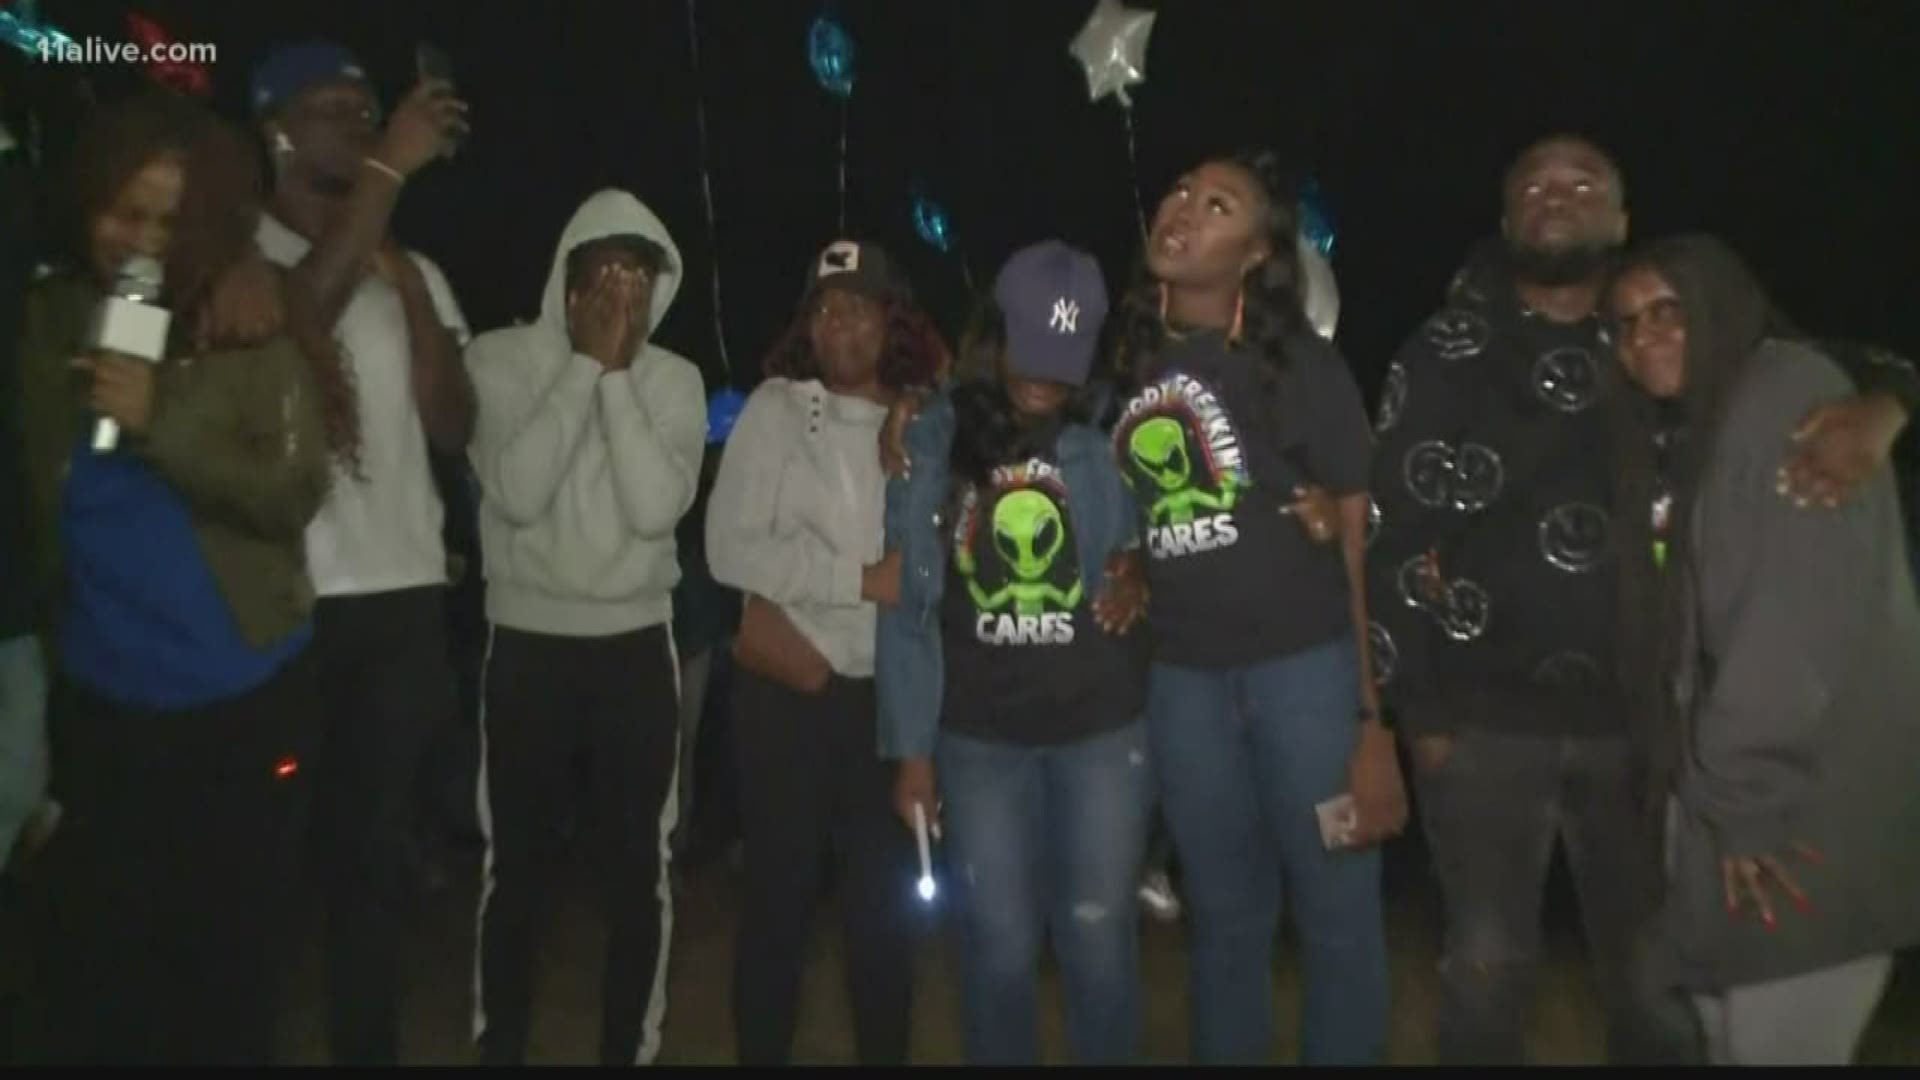 Many gathered in Gwinnett County at Harbins Park Thursday night for a vigil to honor his life with candlelight and prayers as they shared their grief.